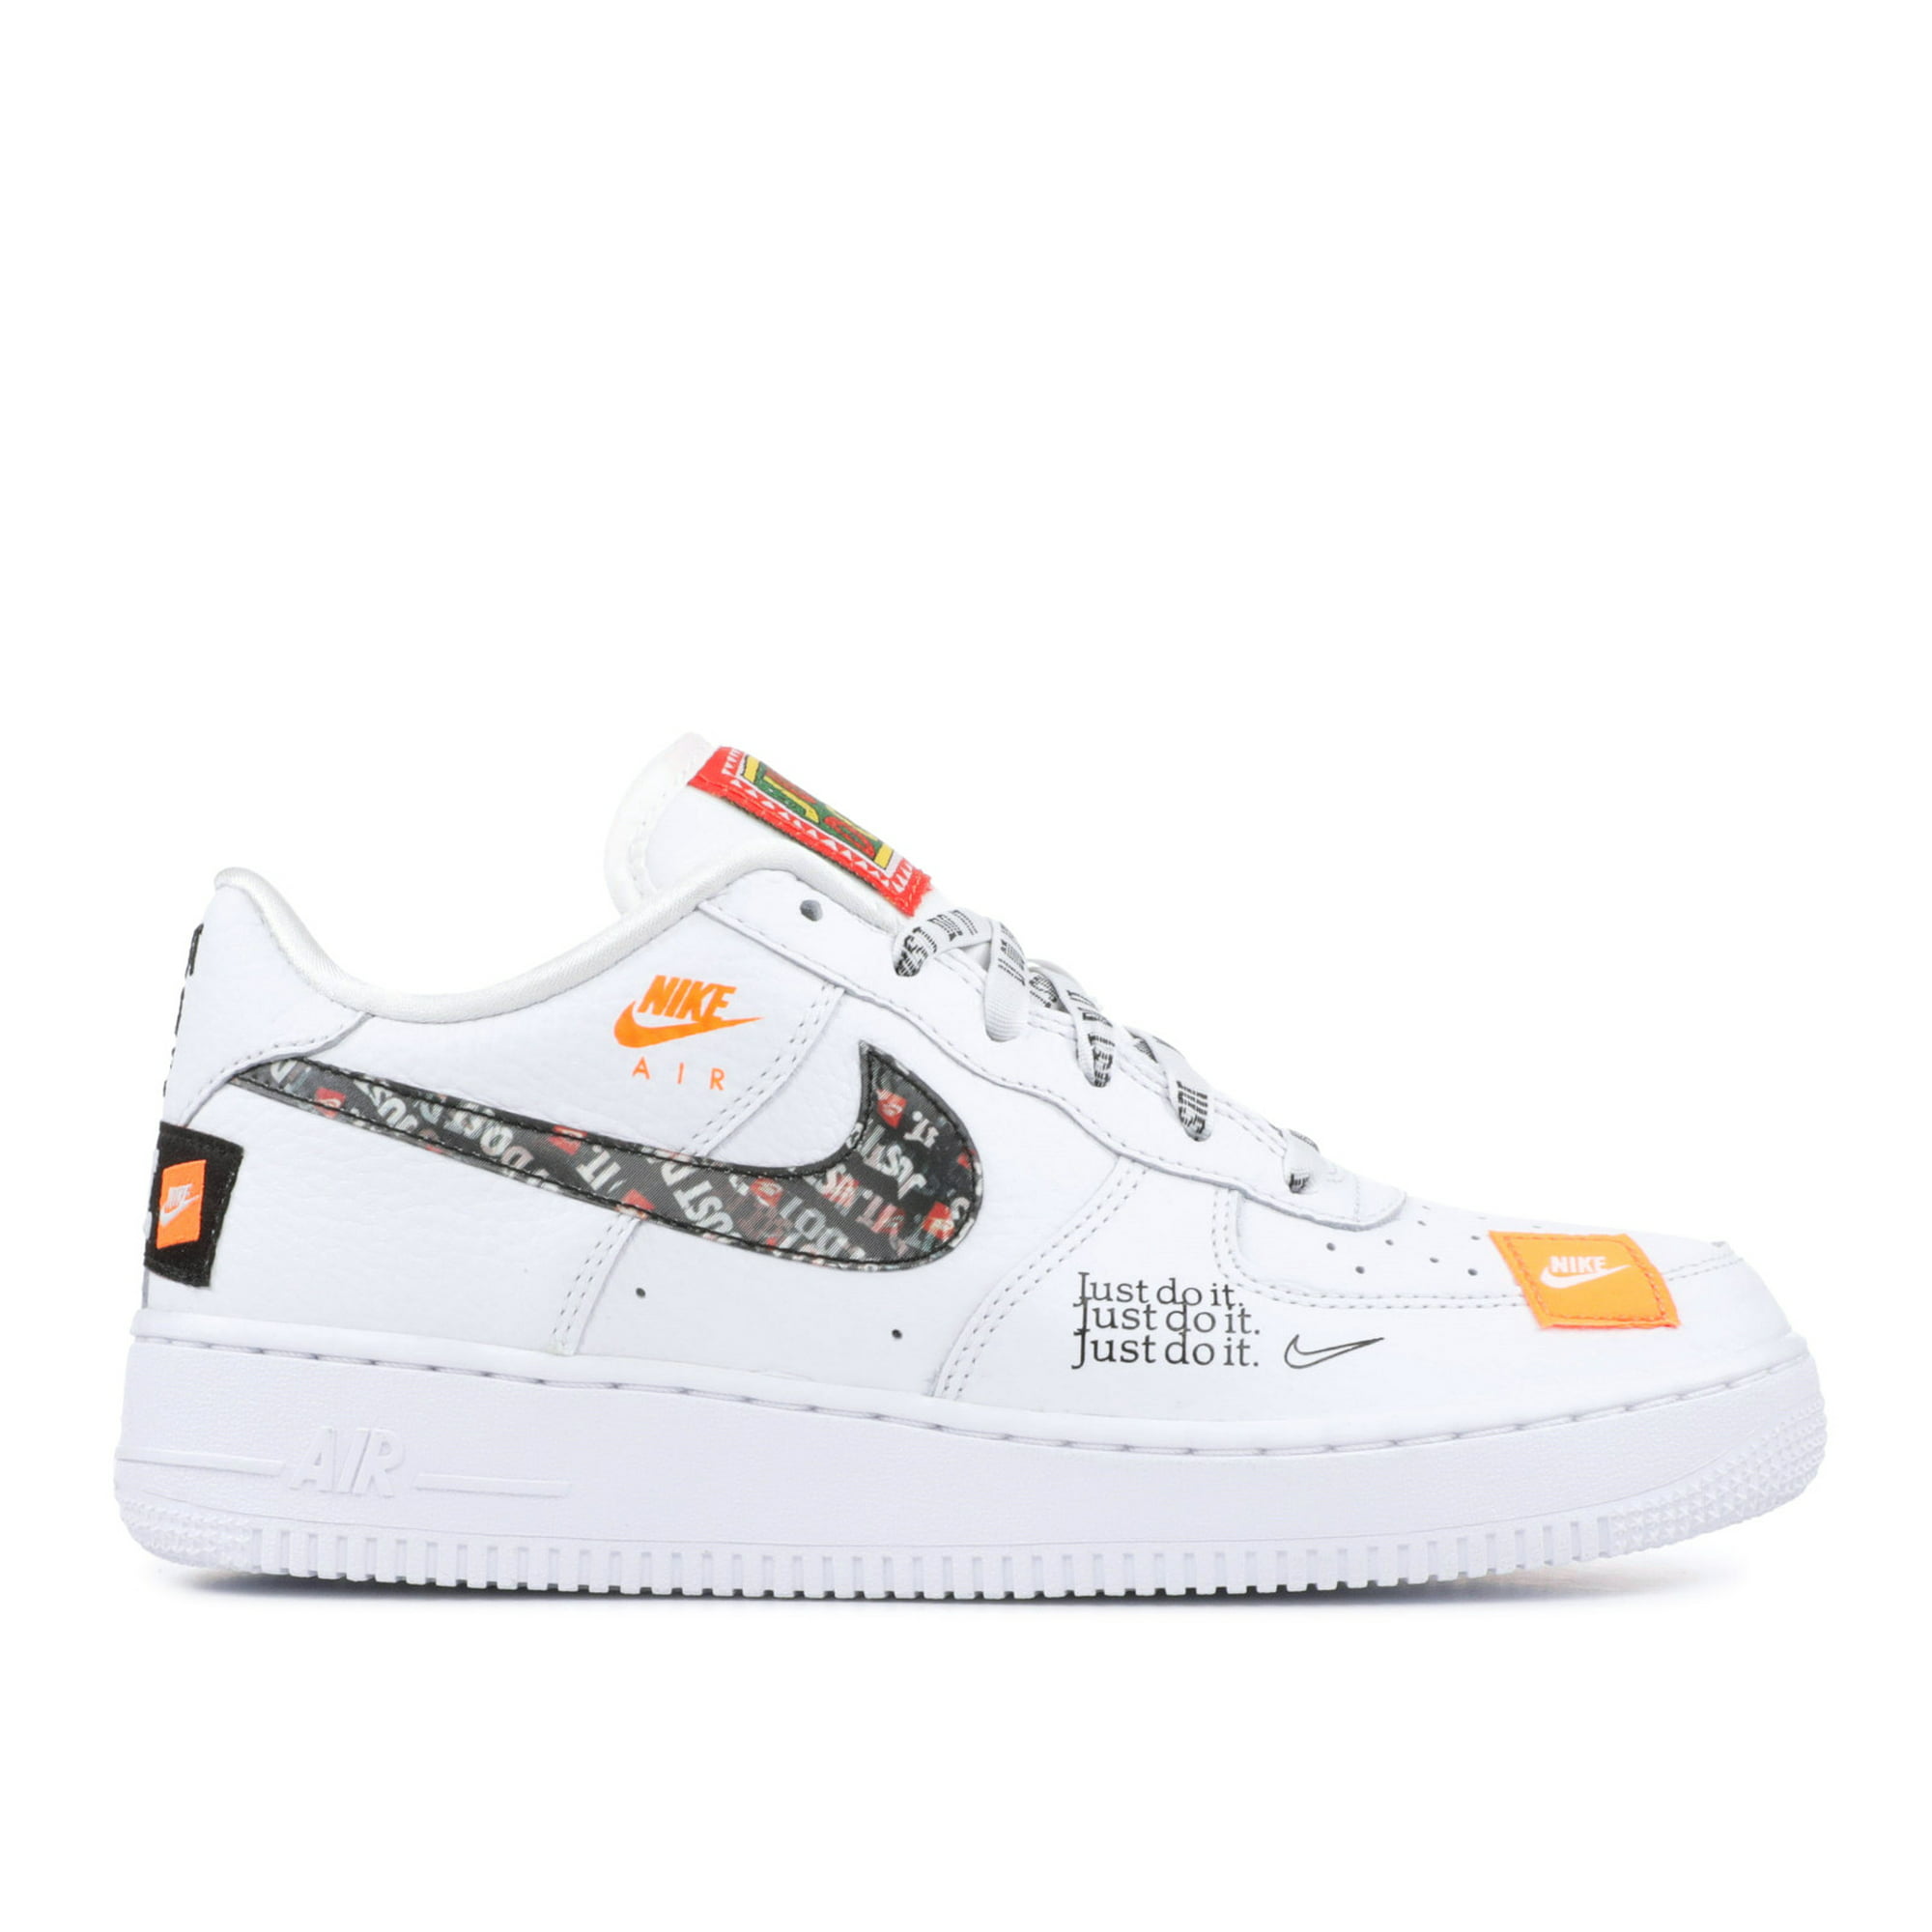 Nike - Unisex - Air Force 1 Jdi Prm (Gs) 'Just Do It' - Ao3977-100 ...